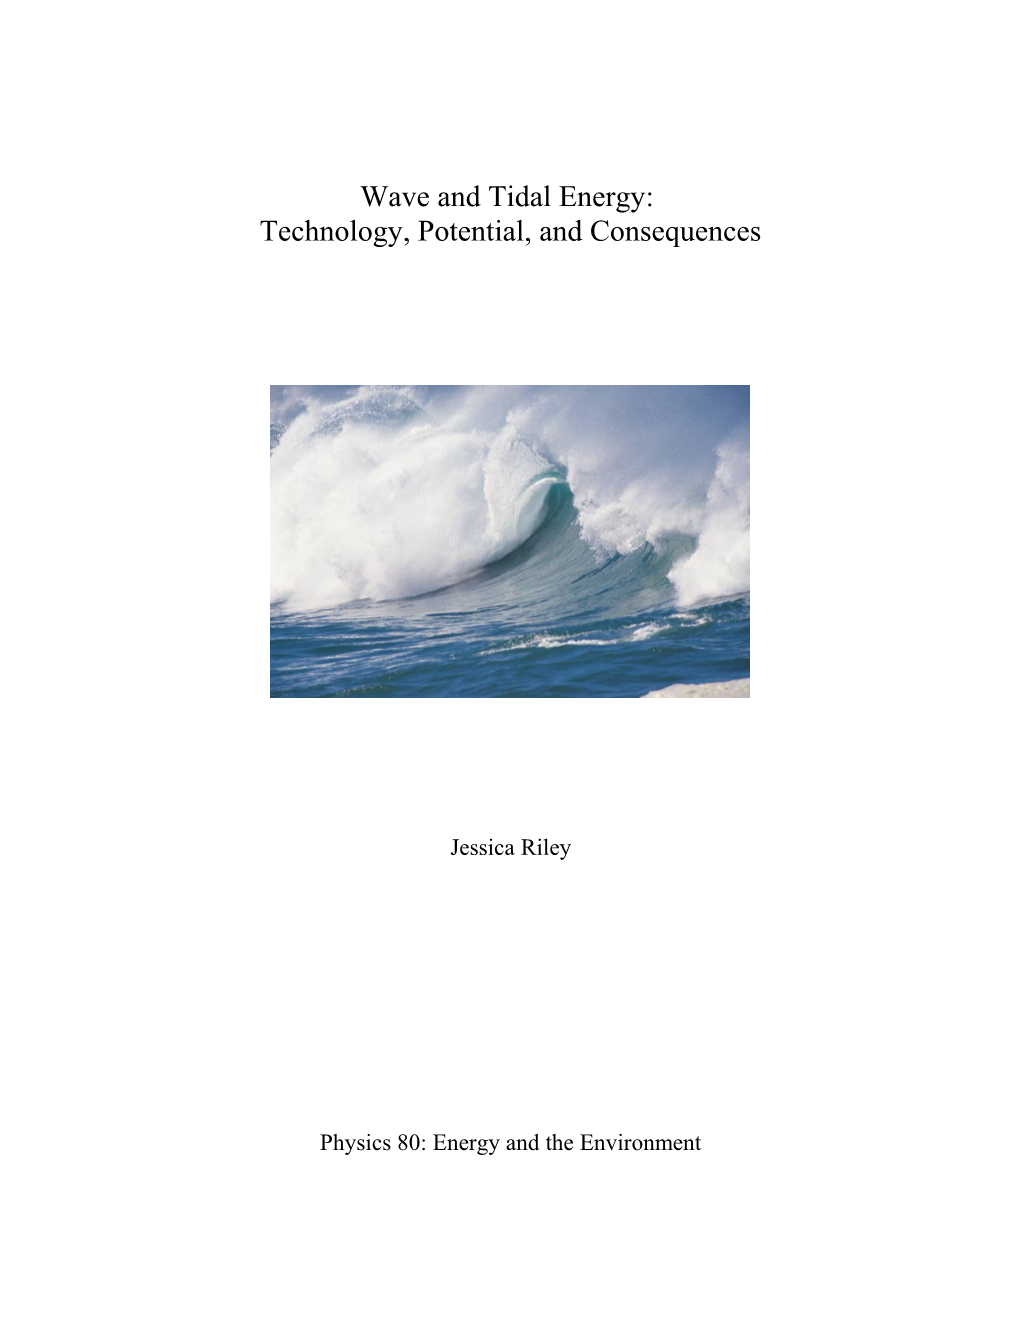 Wave and Tidal Energy: Technology, Potential, and Consequences